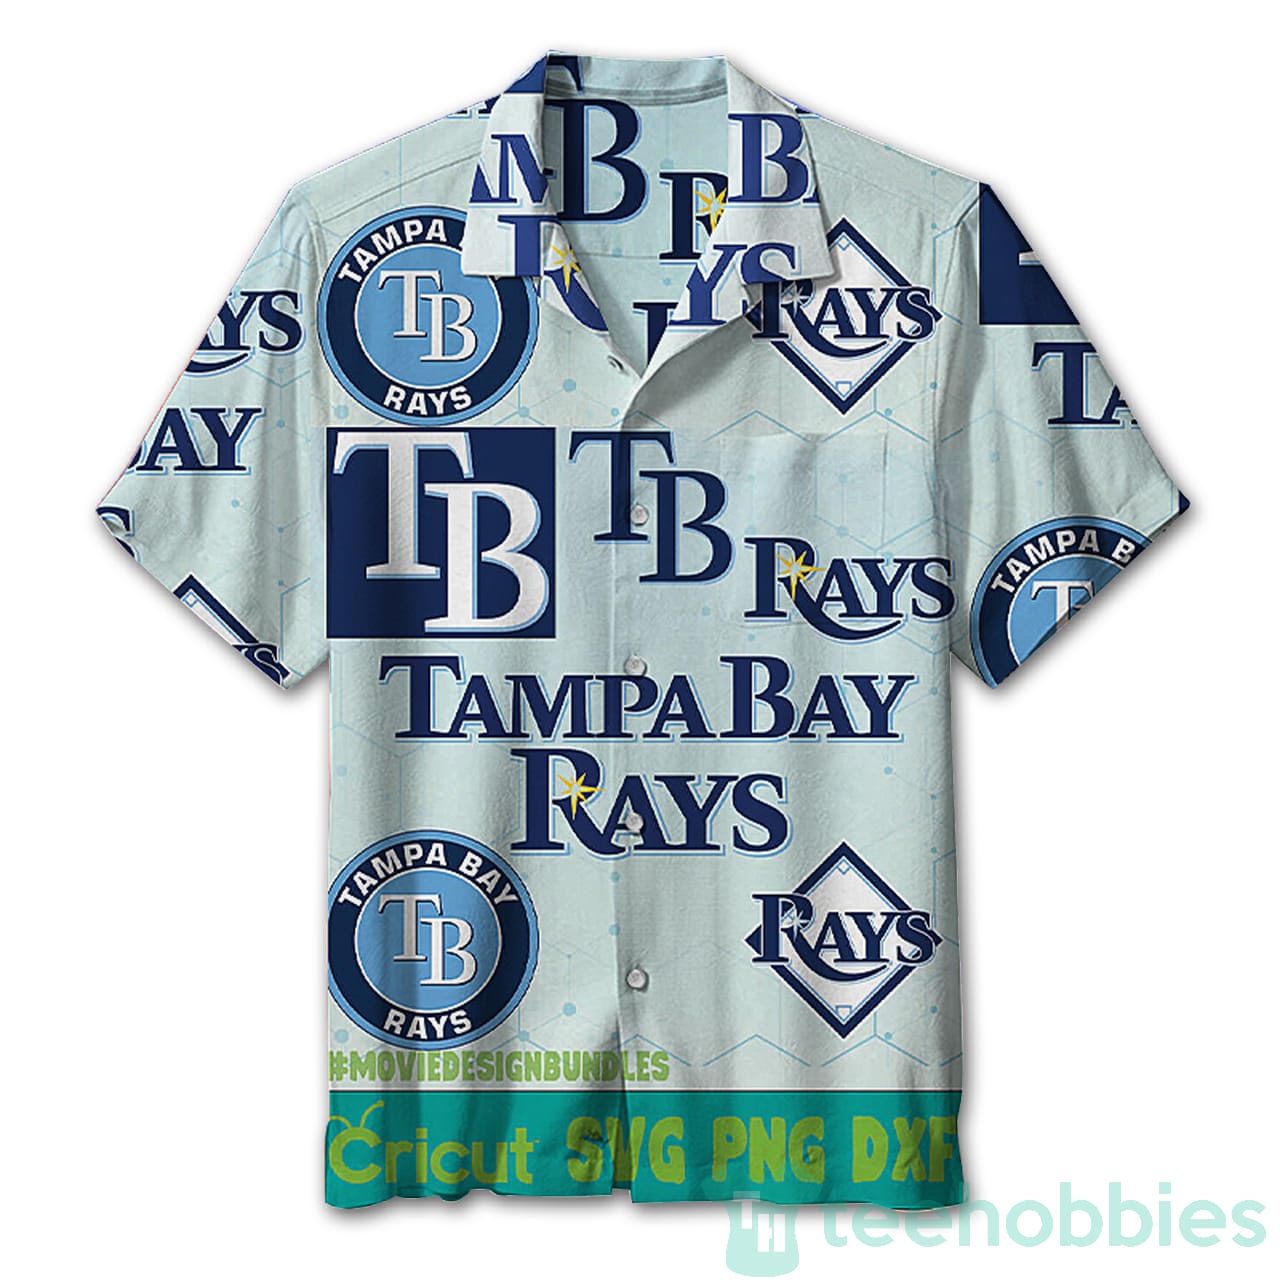 Rays home jersey